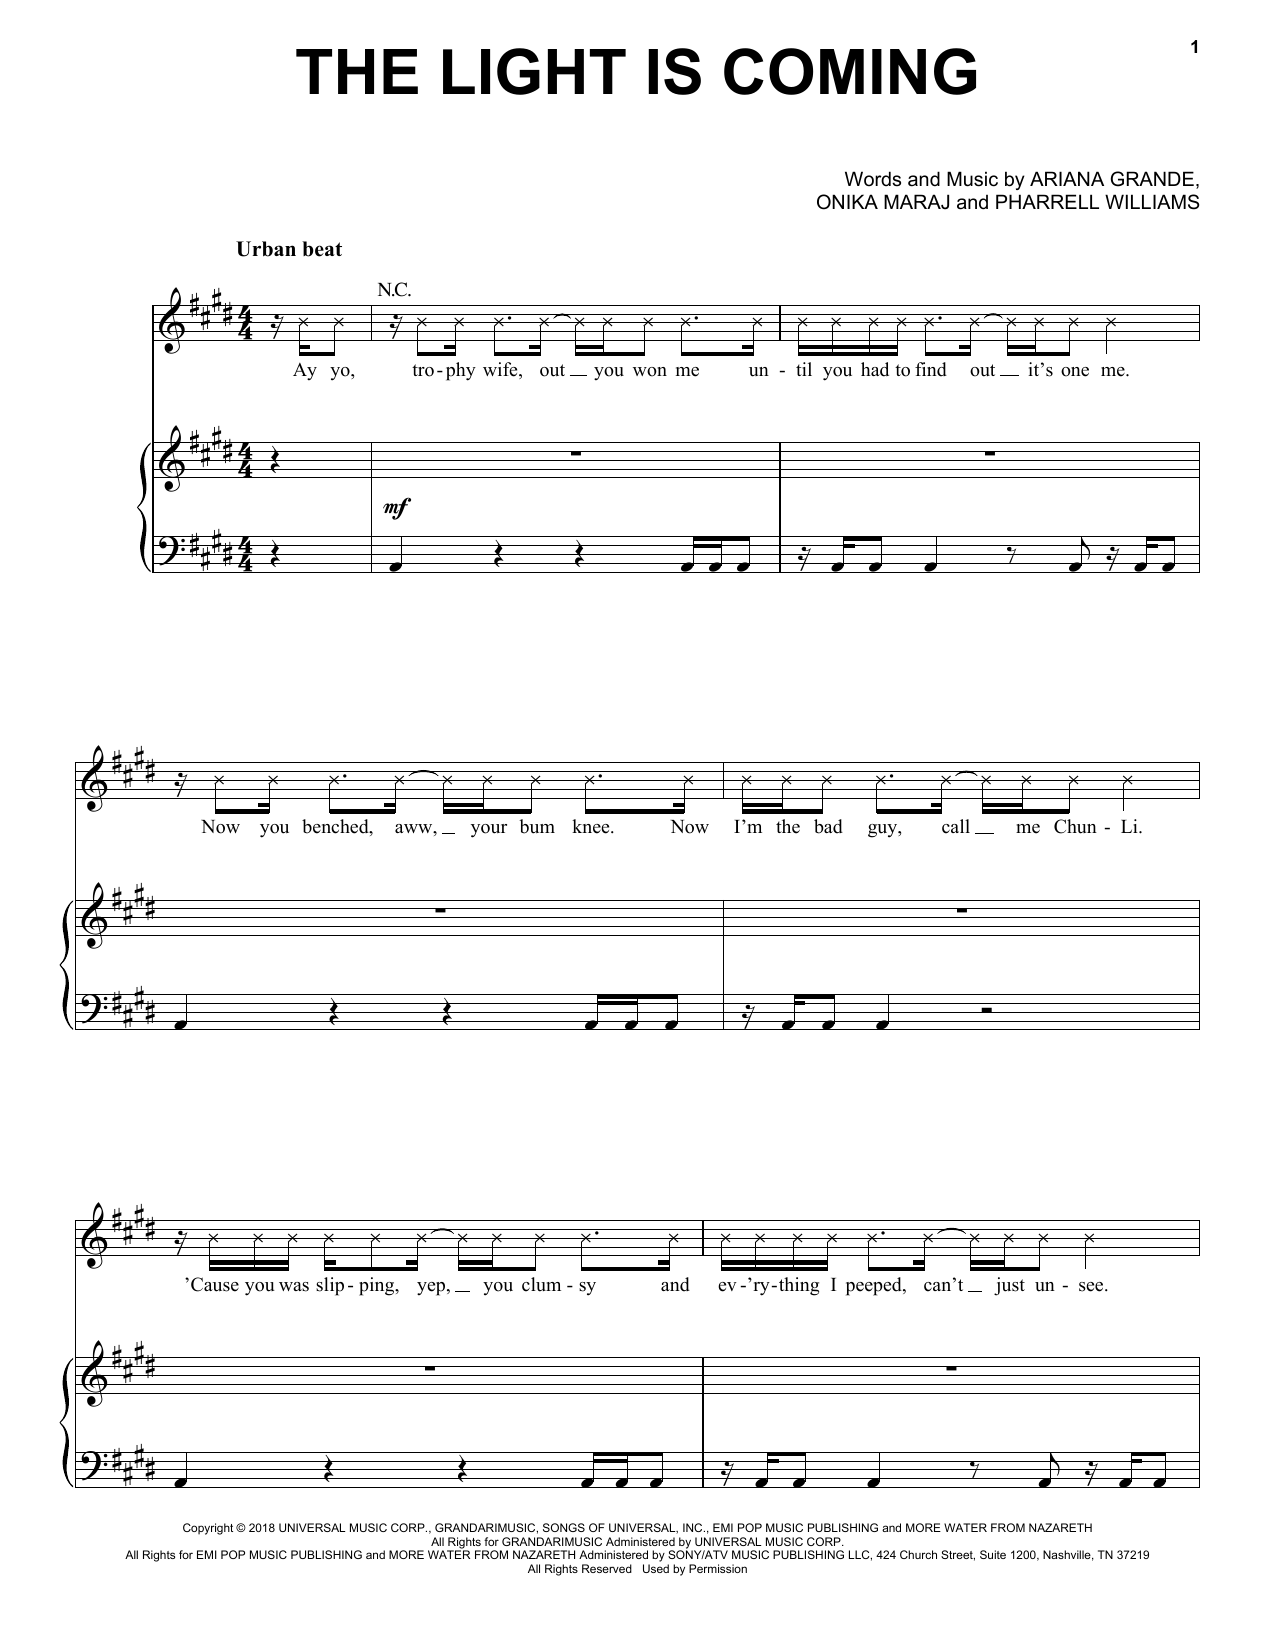 Ariana Grande The Light Is Coming sheet music notes and chords. Download Printable PDF.